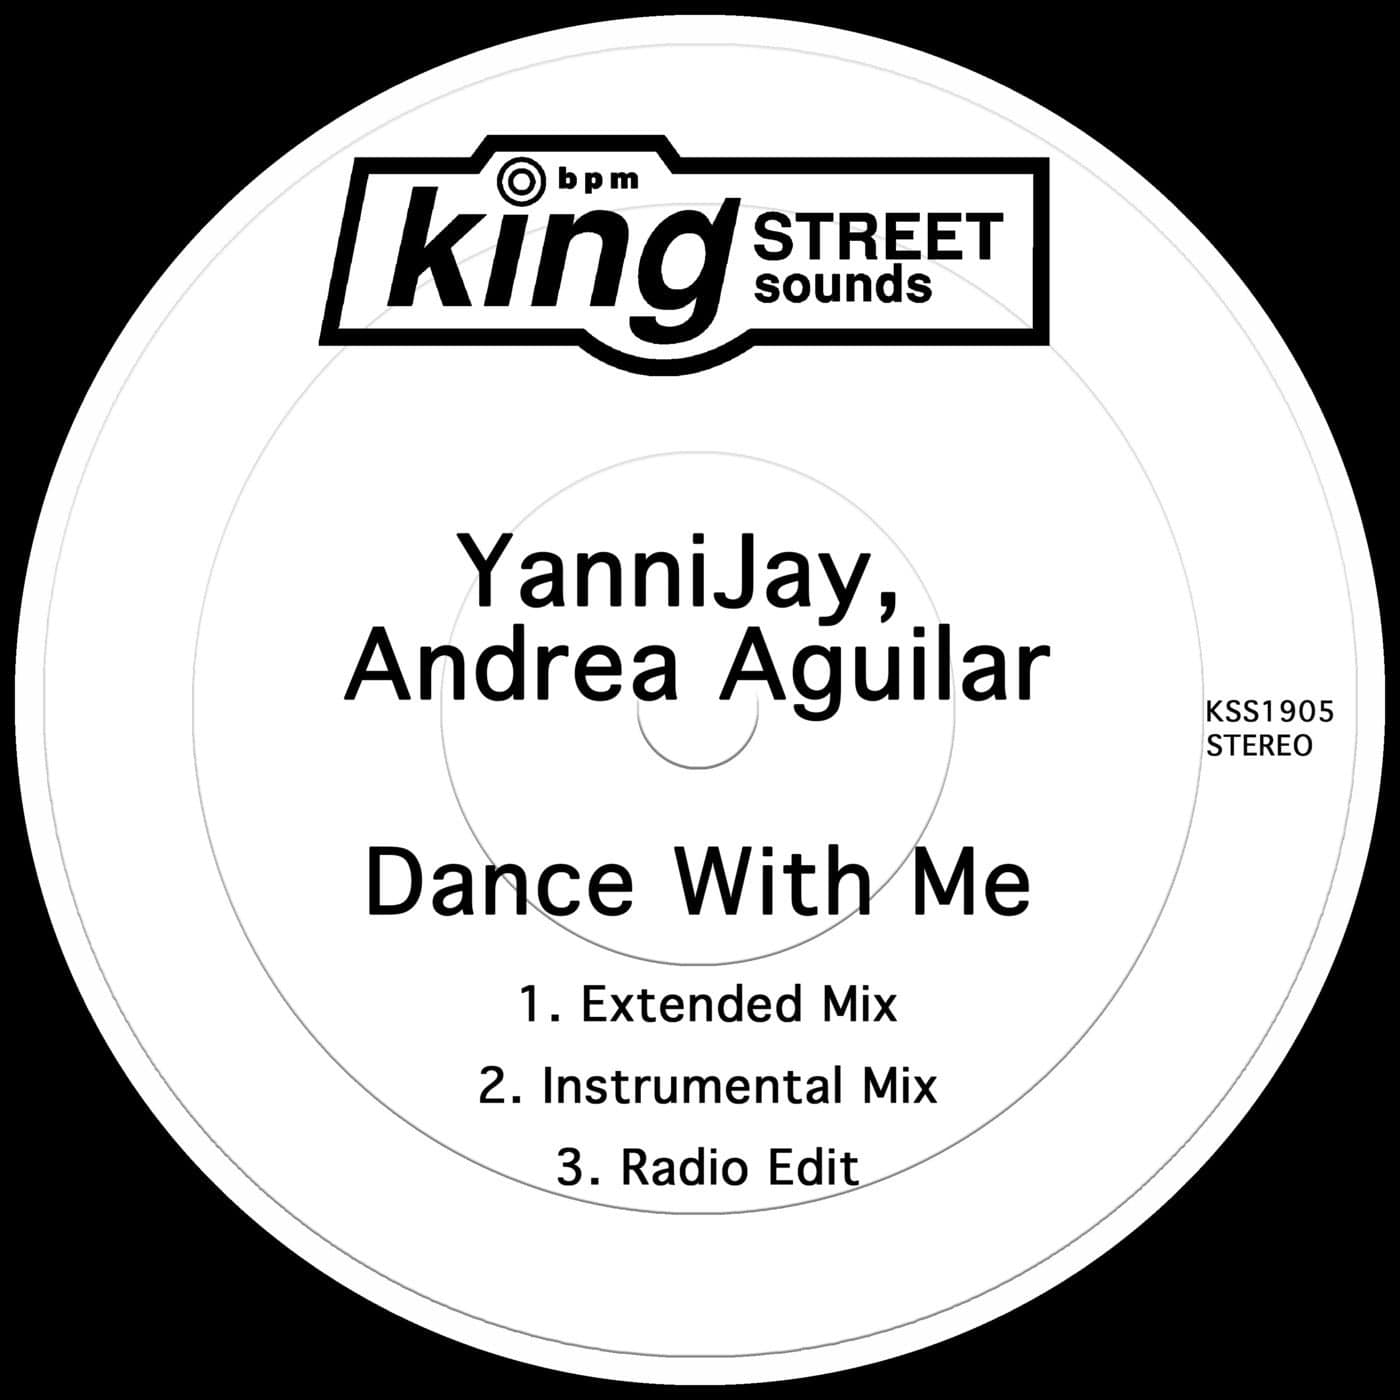 image cover: YanniJay, Andrea Aguilar - Dance With Me / KSS1905